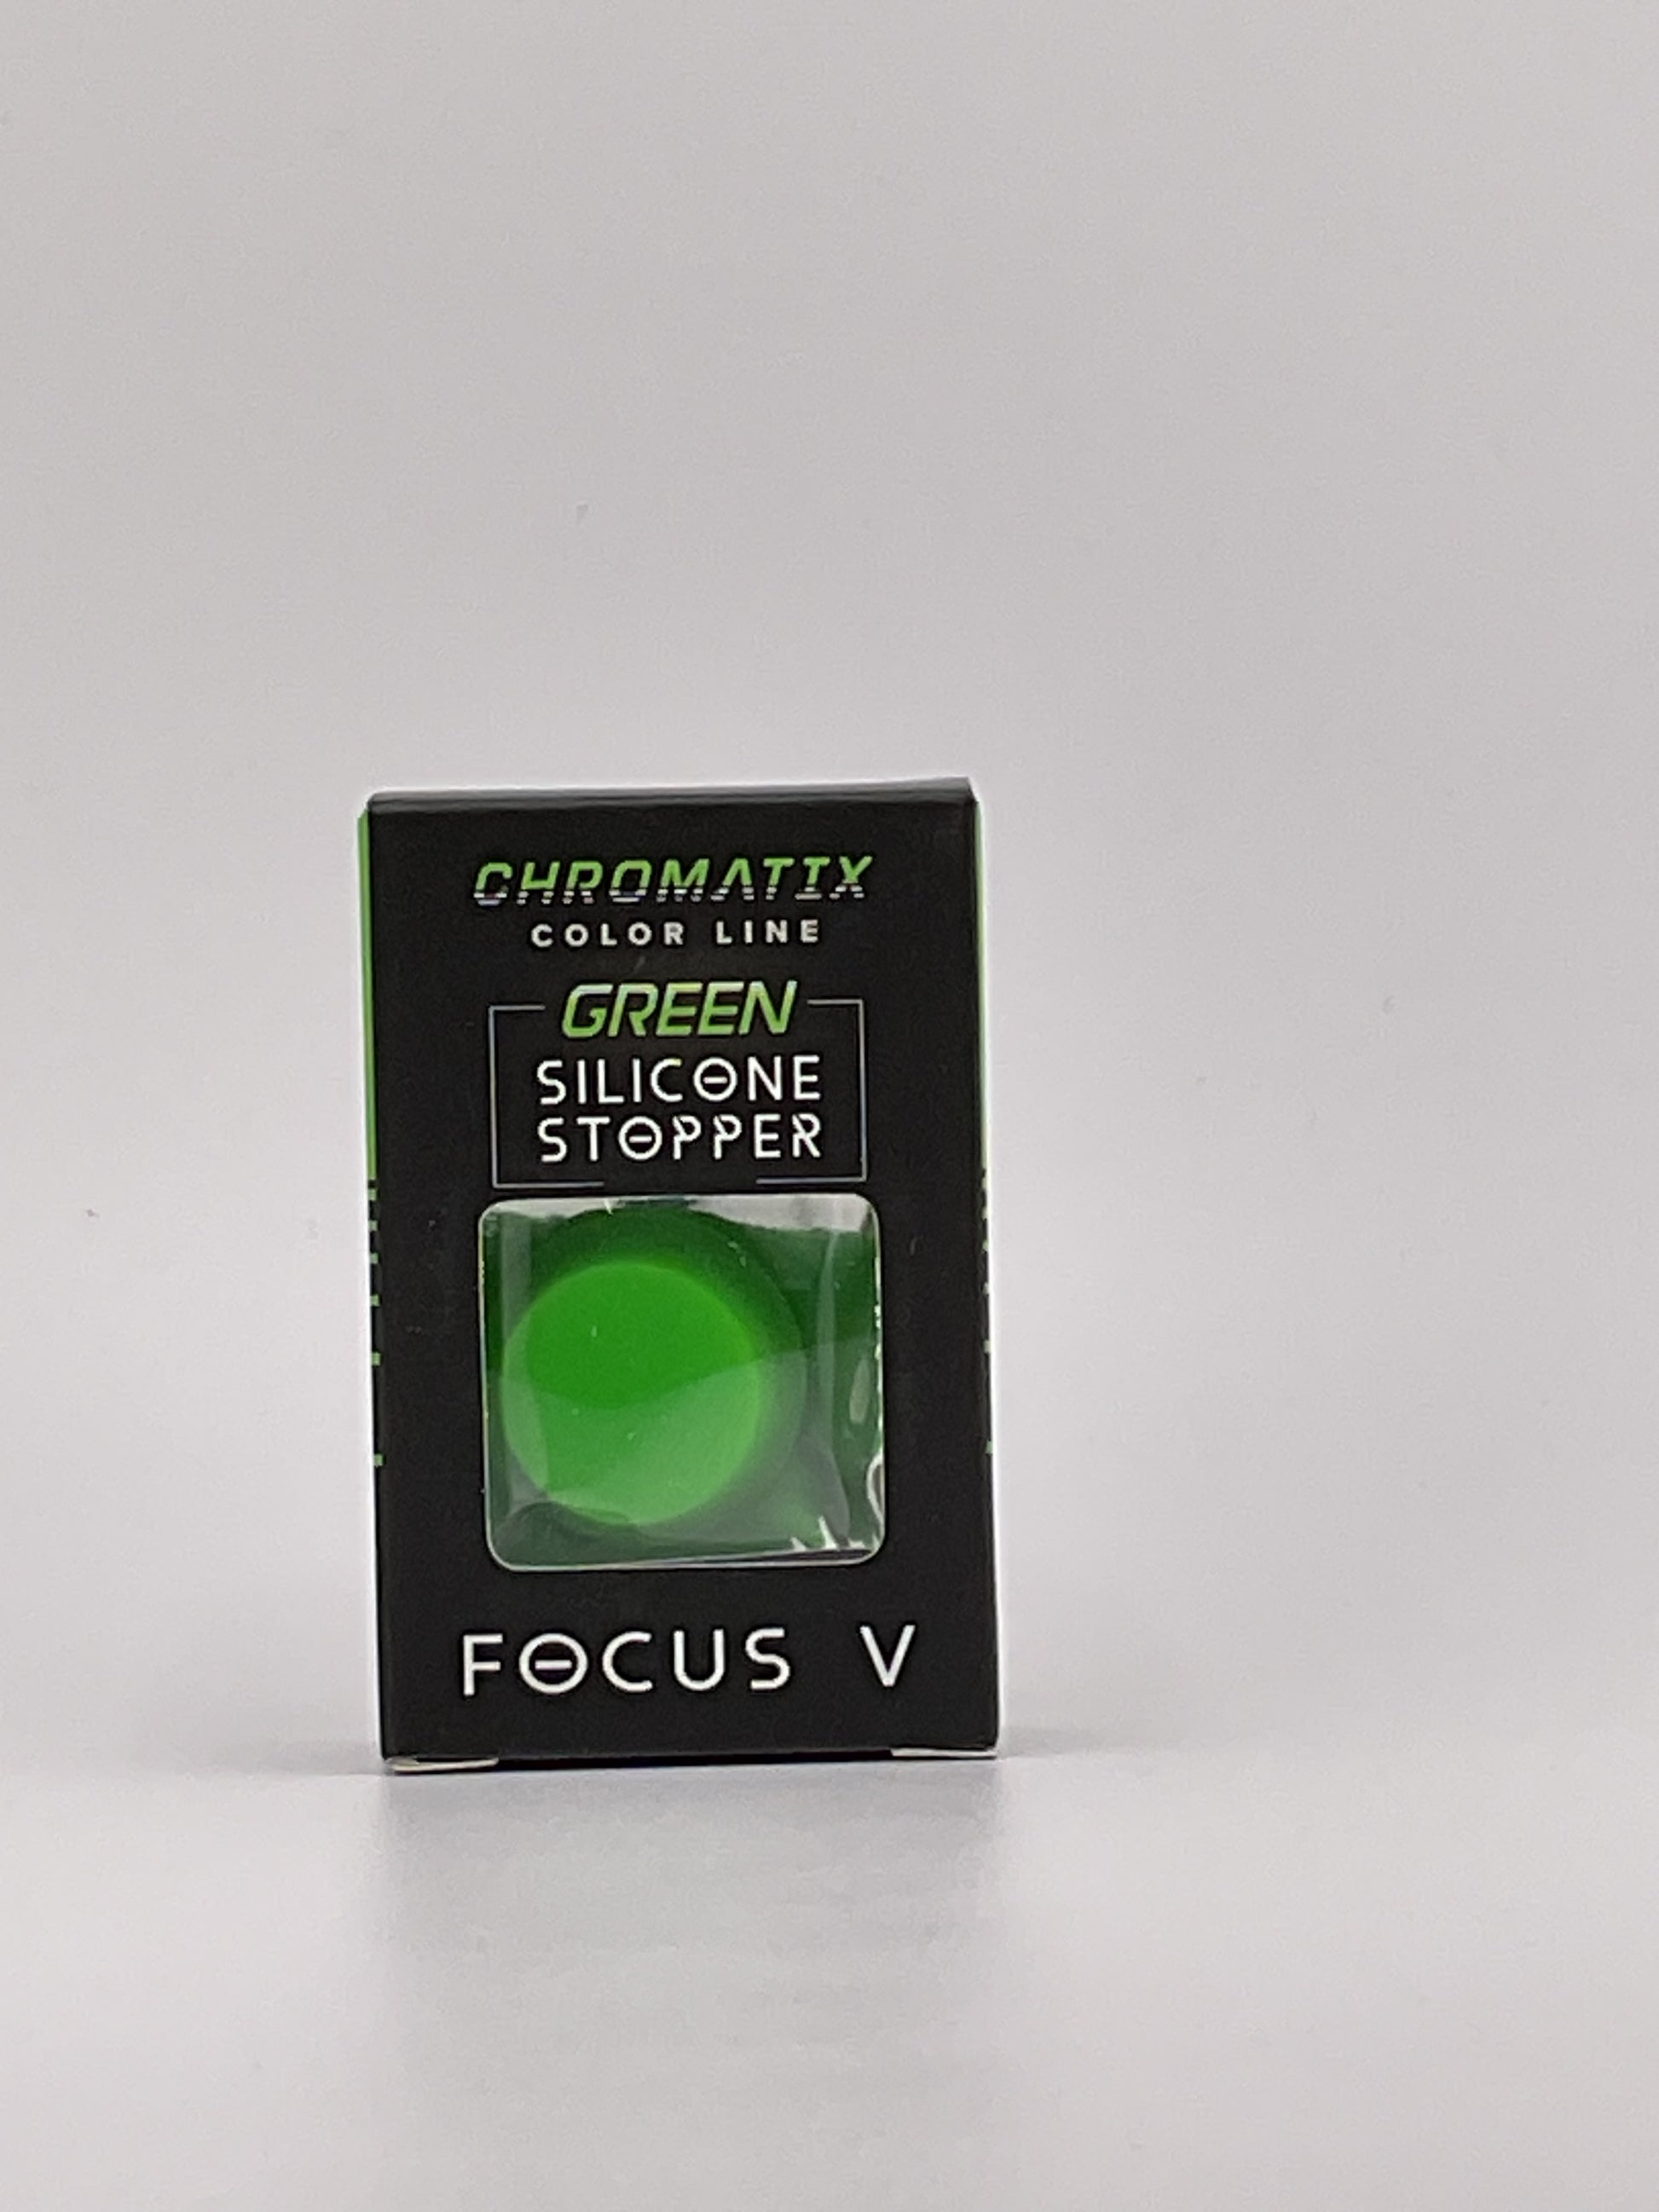 Carta focus V Green silicone stopper

Available for pickup in post falls Idaho